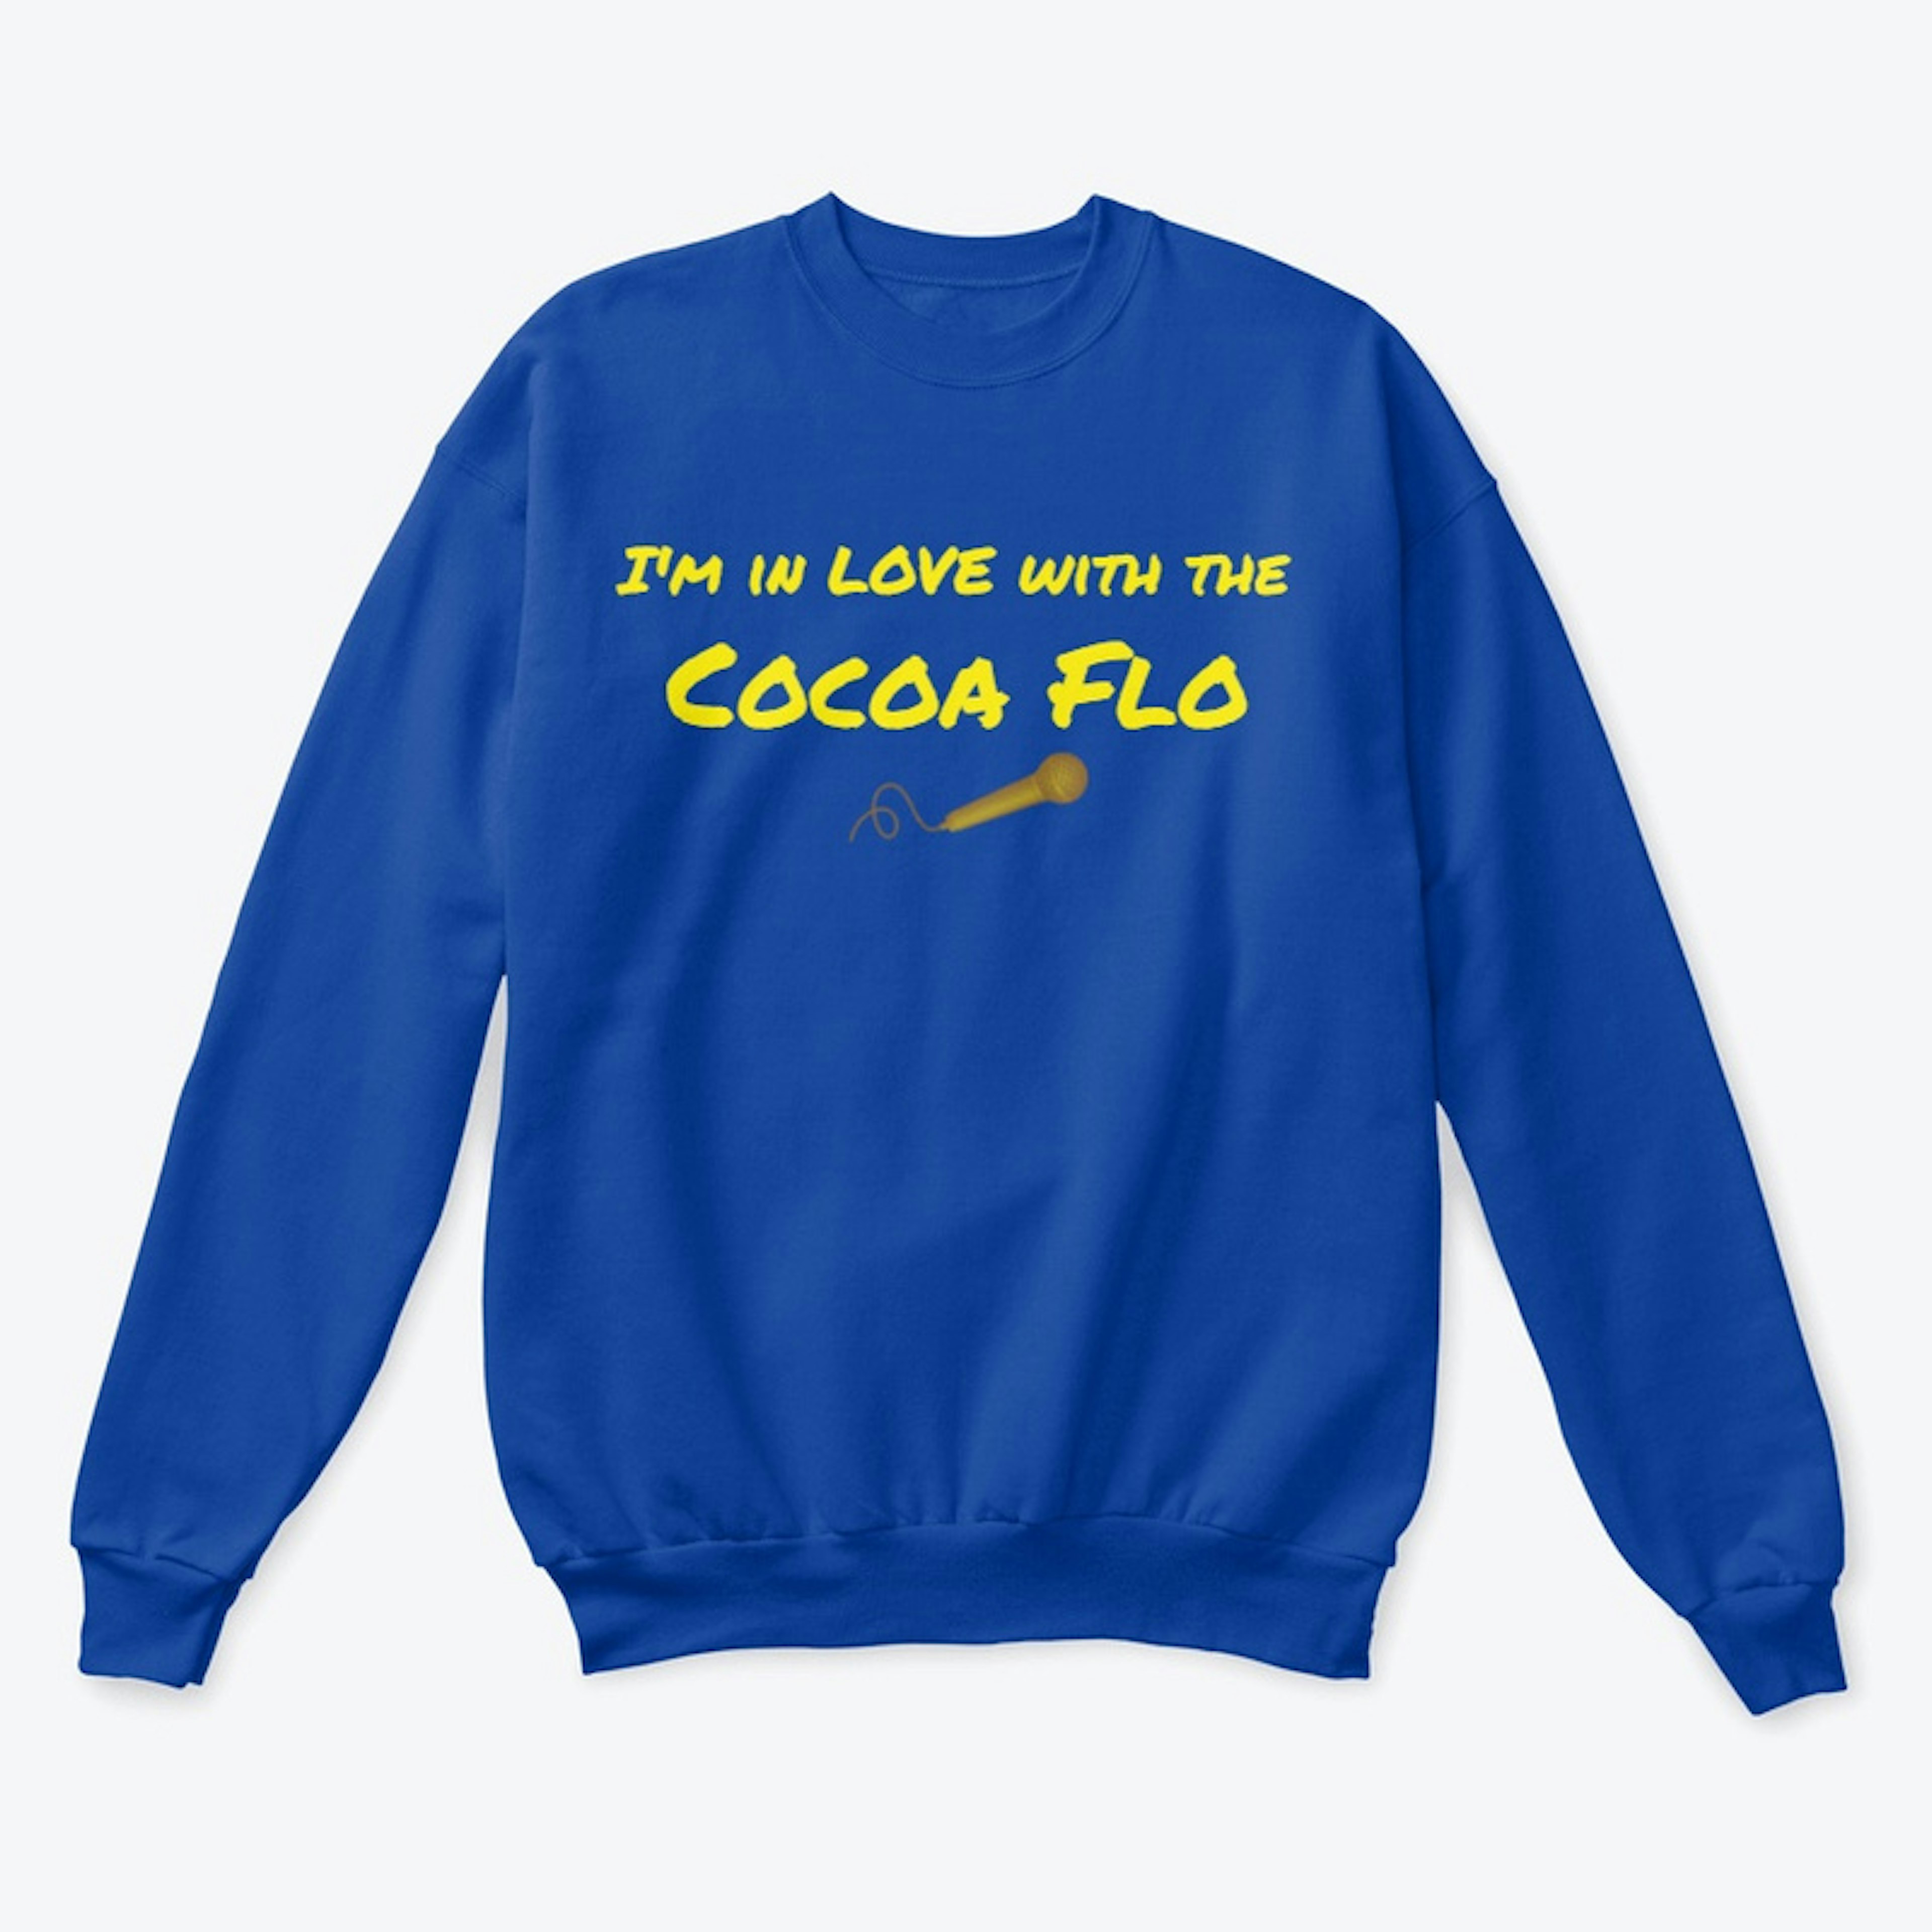 I'm In Love With The Cocoa Flo